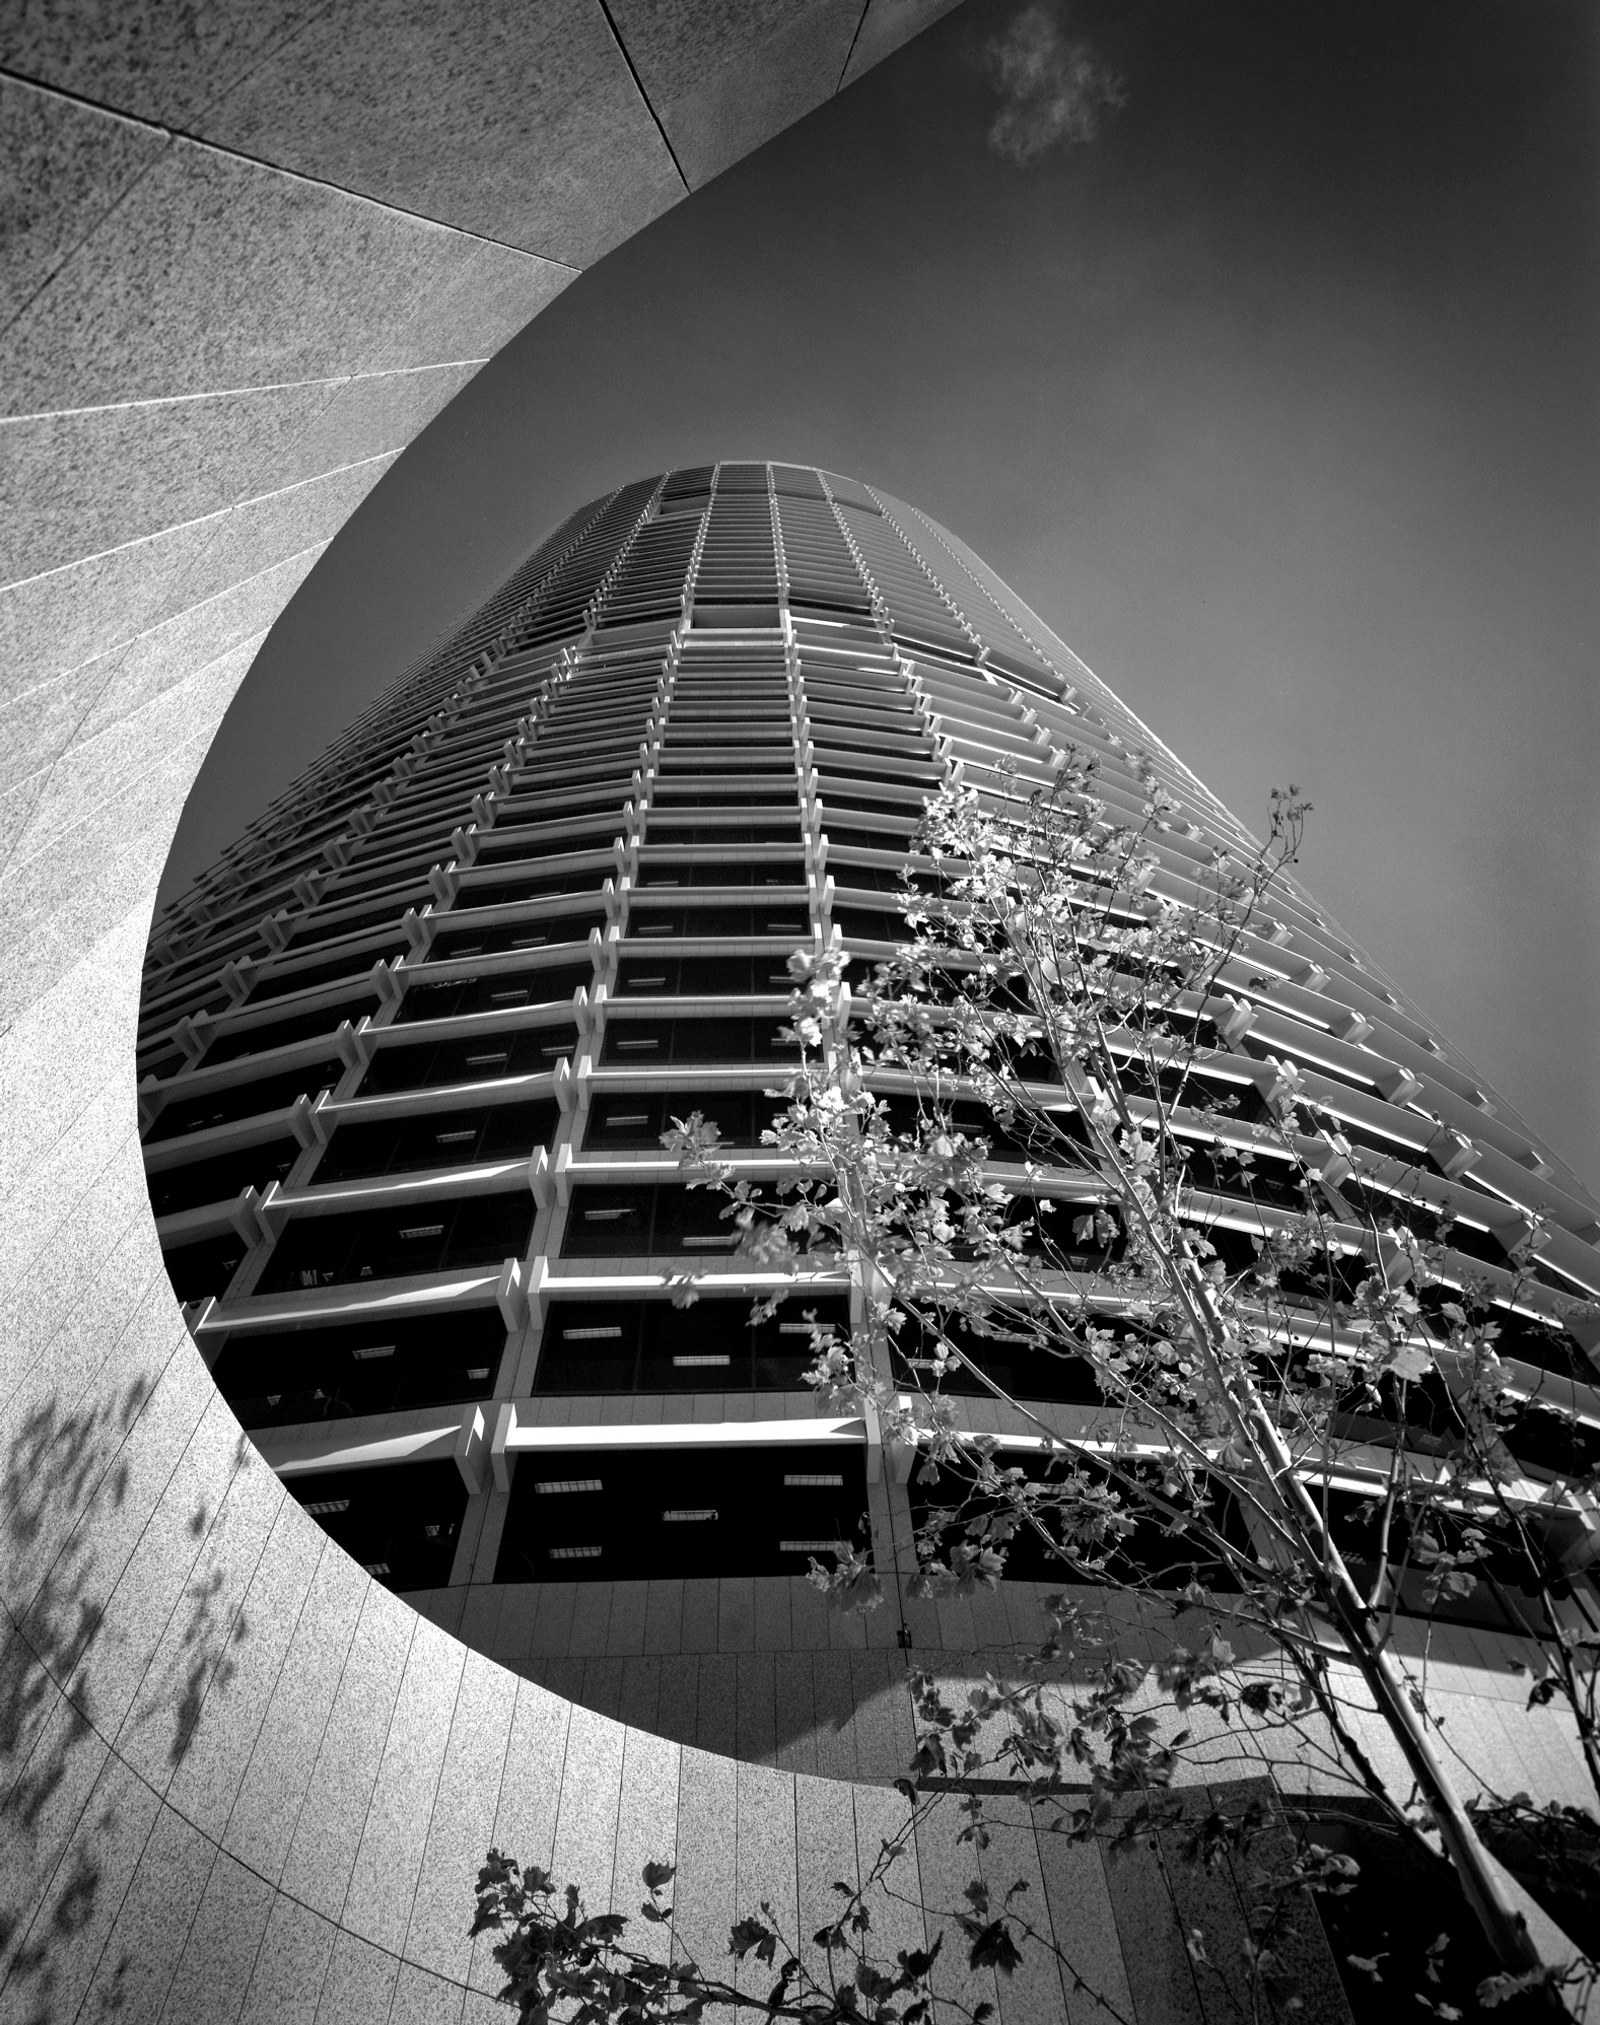 This is a black and white photograph of a tower building taken form below showing a sweeping curved wall at the base